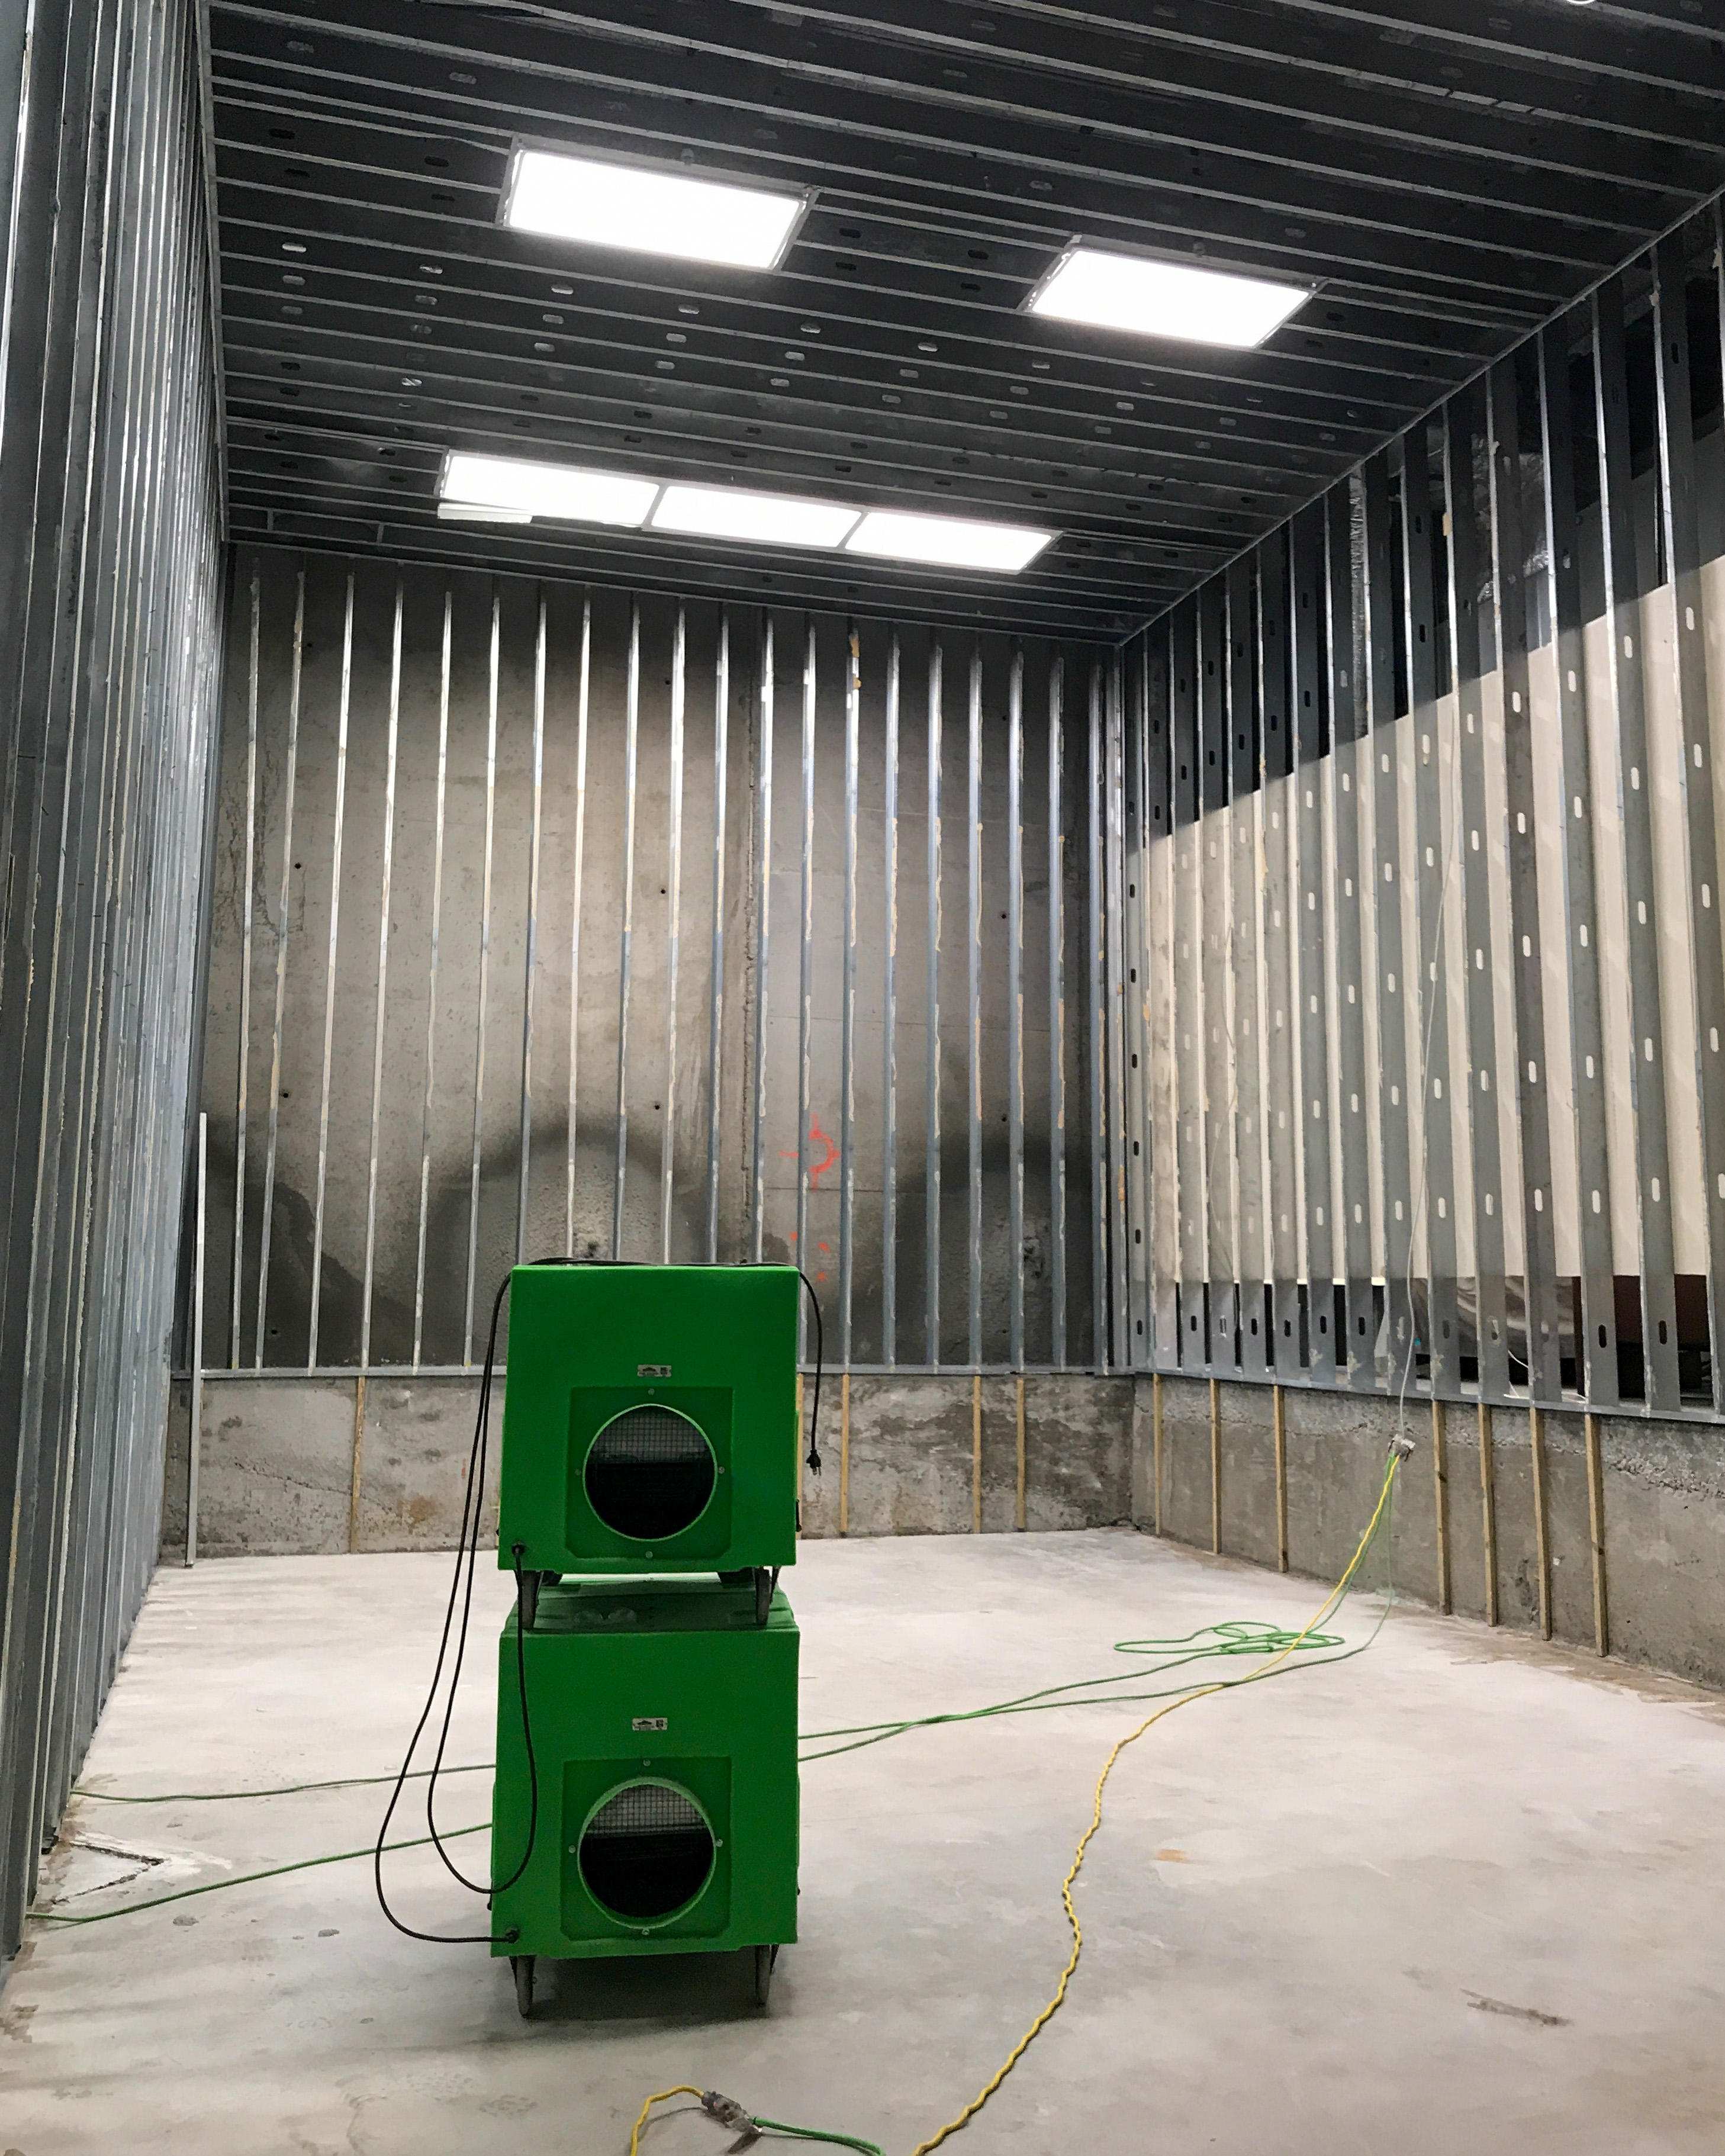 SERVPRO of Forsyth and Dawson Counties can respond immediately to your commercial fire damage emergency regardless of the size or scope of the damage.